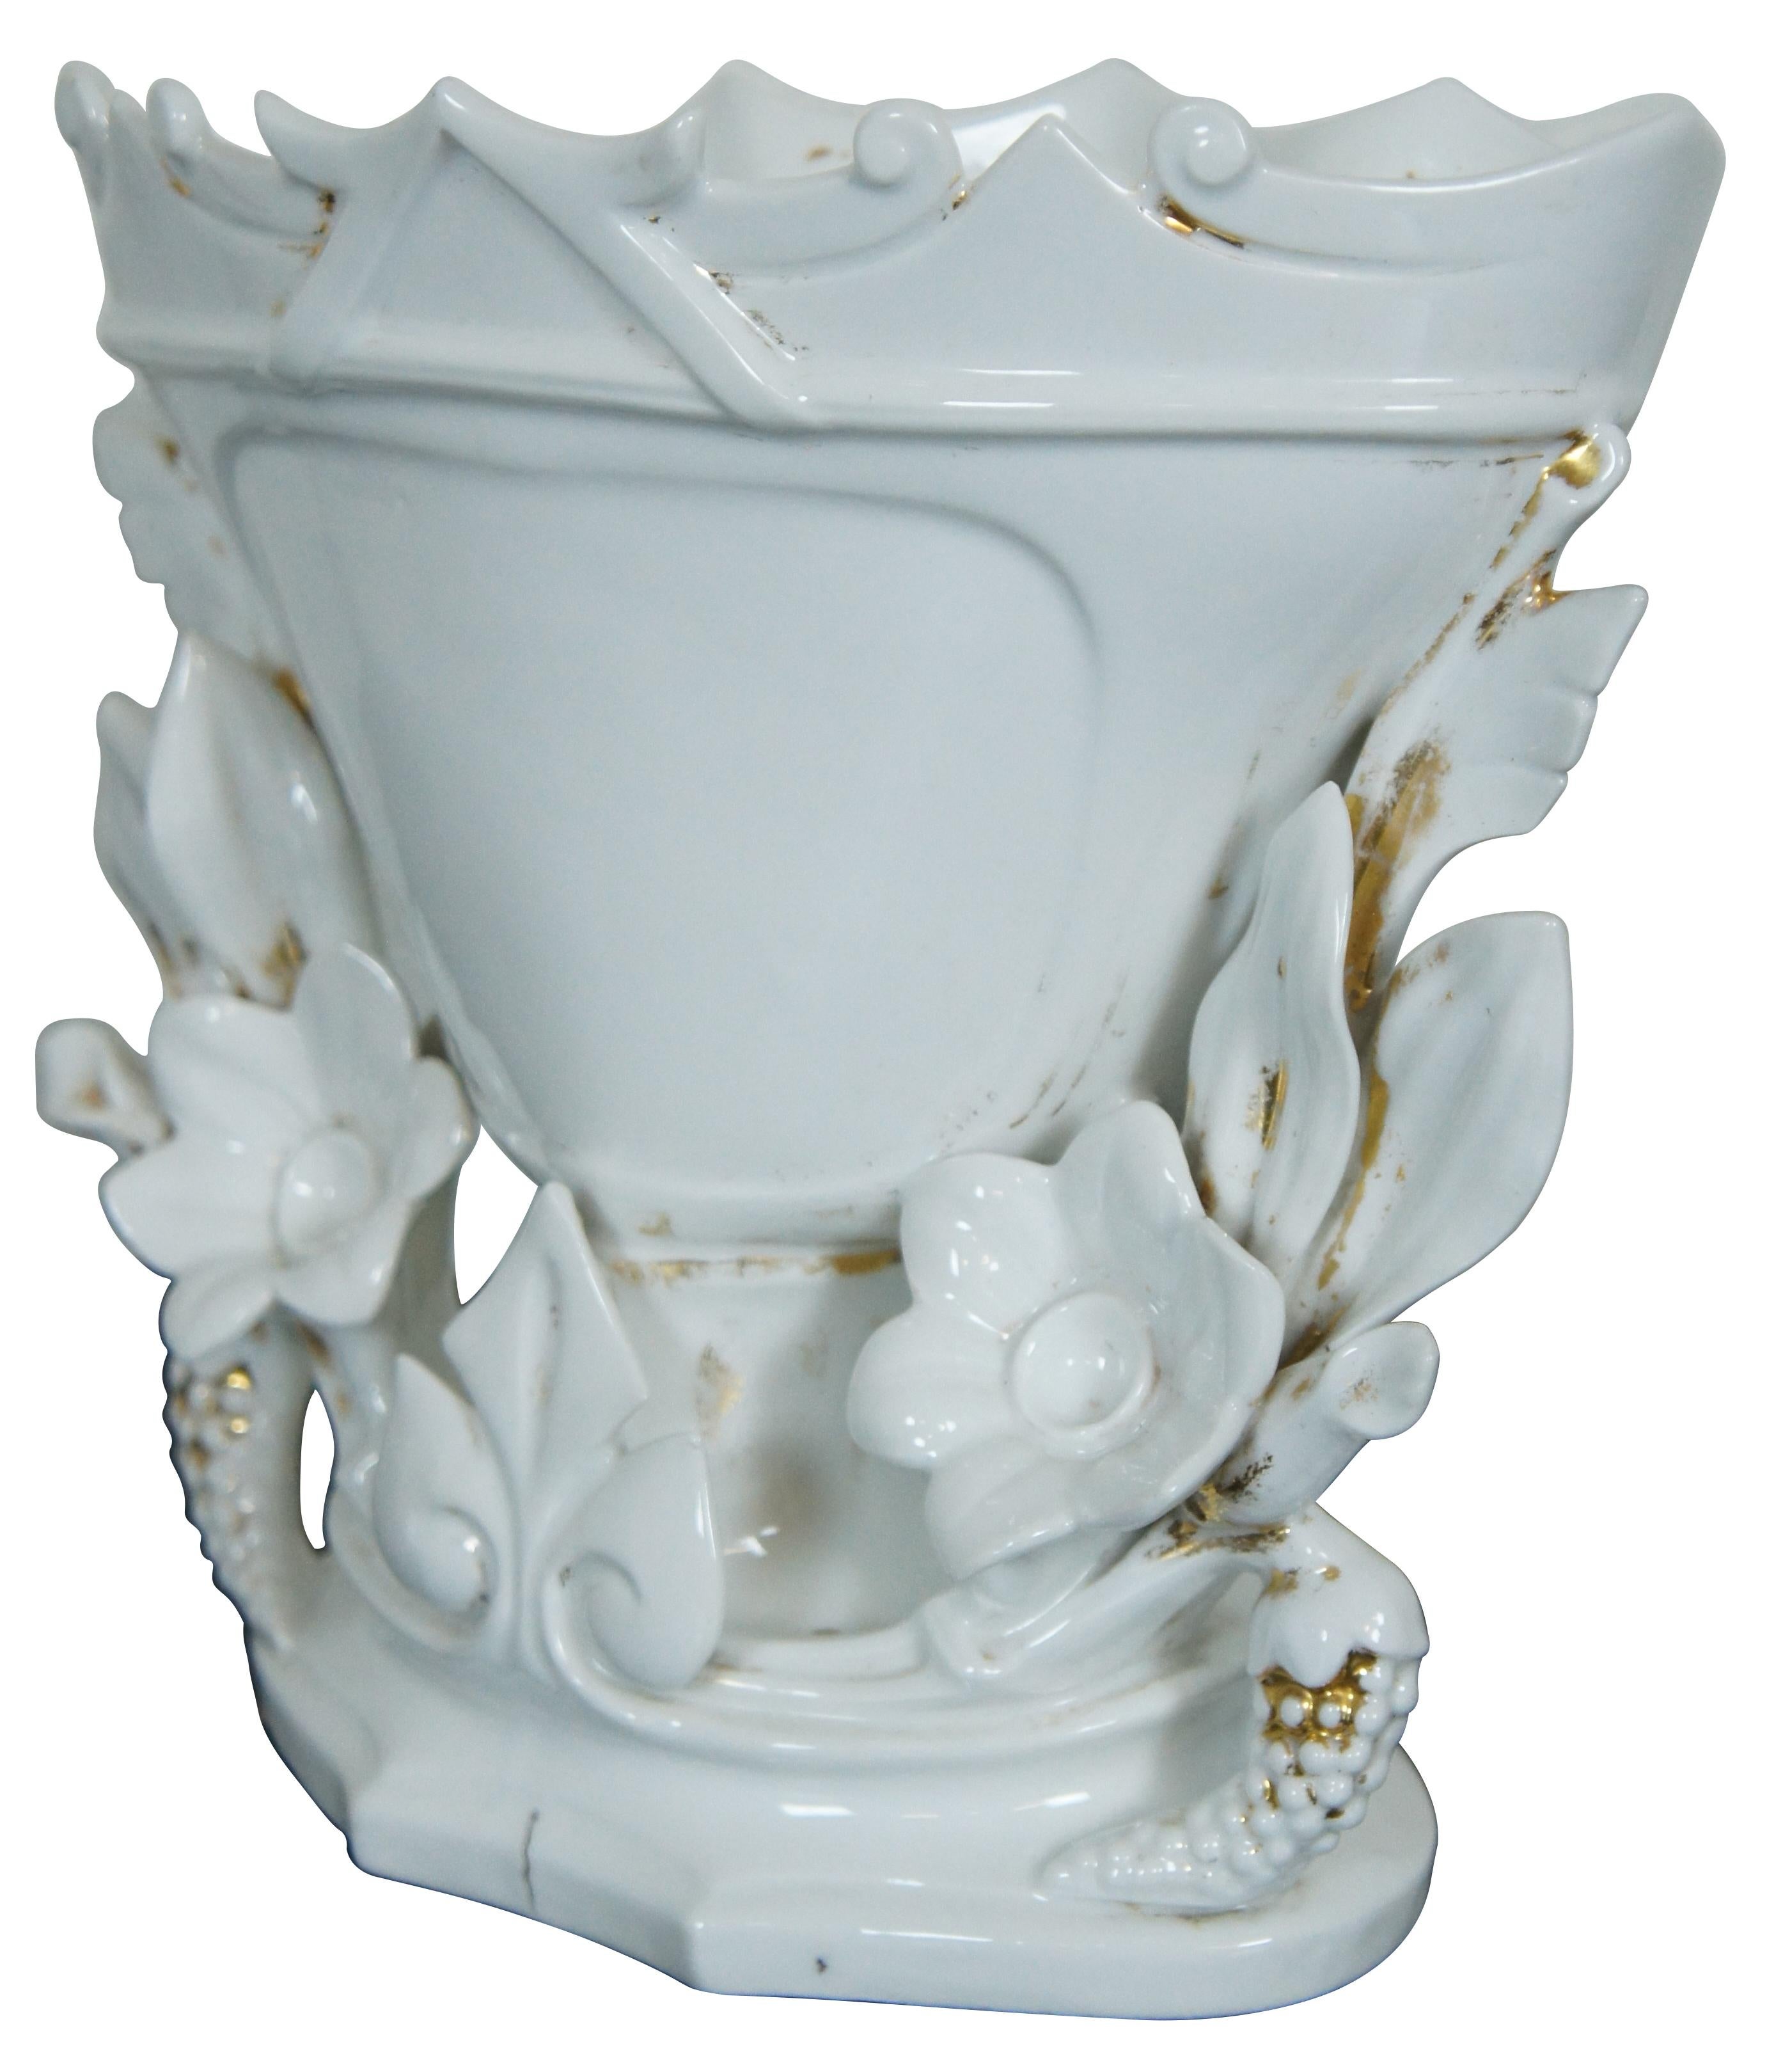 Antique French Vieux Old Paris white porcelain centerpiece vase with a footed goblet or trophy life form with pieced floral accents and scalloped rim.